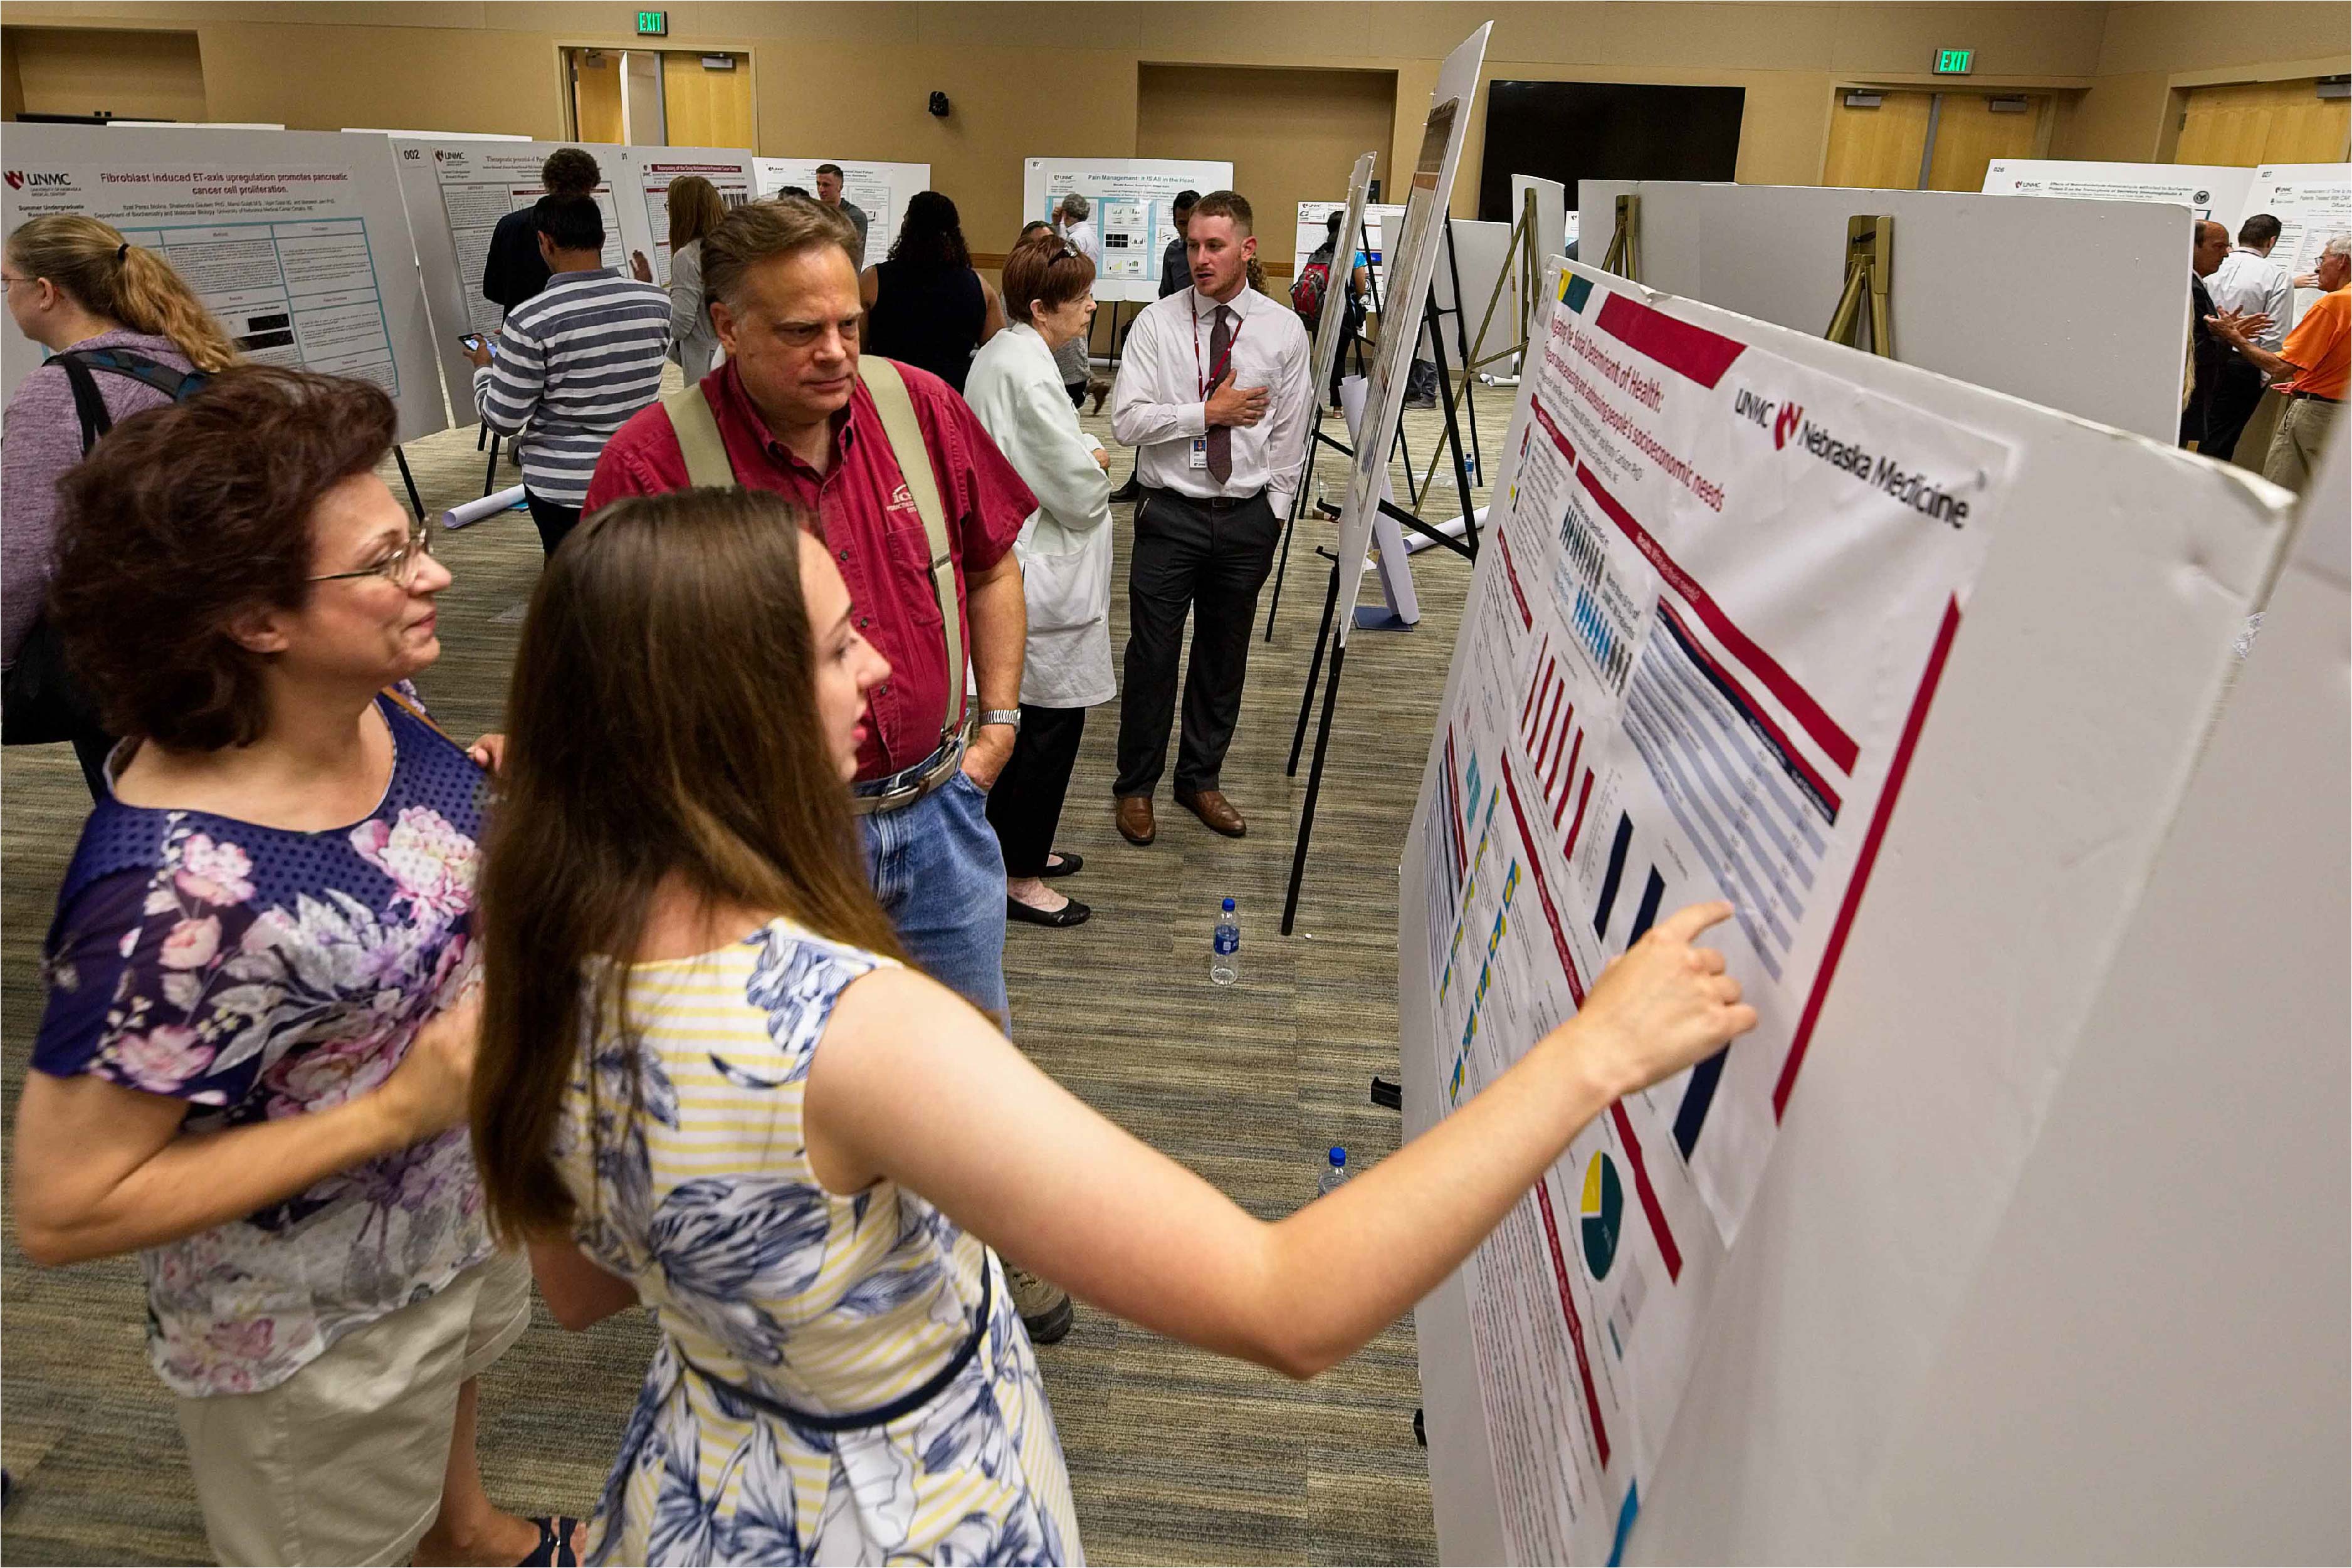 A student presents information on a research poster to observers